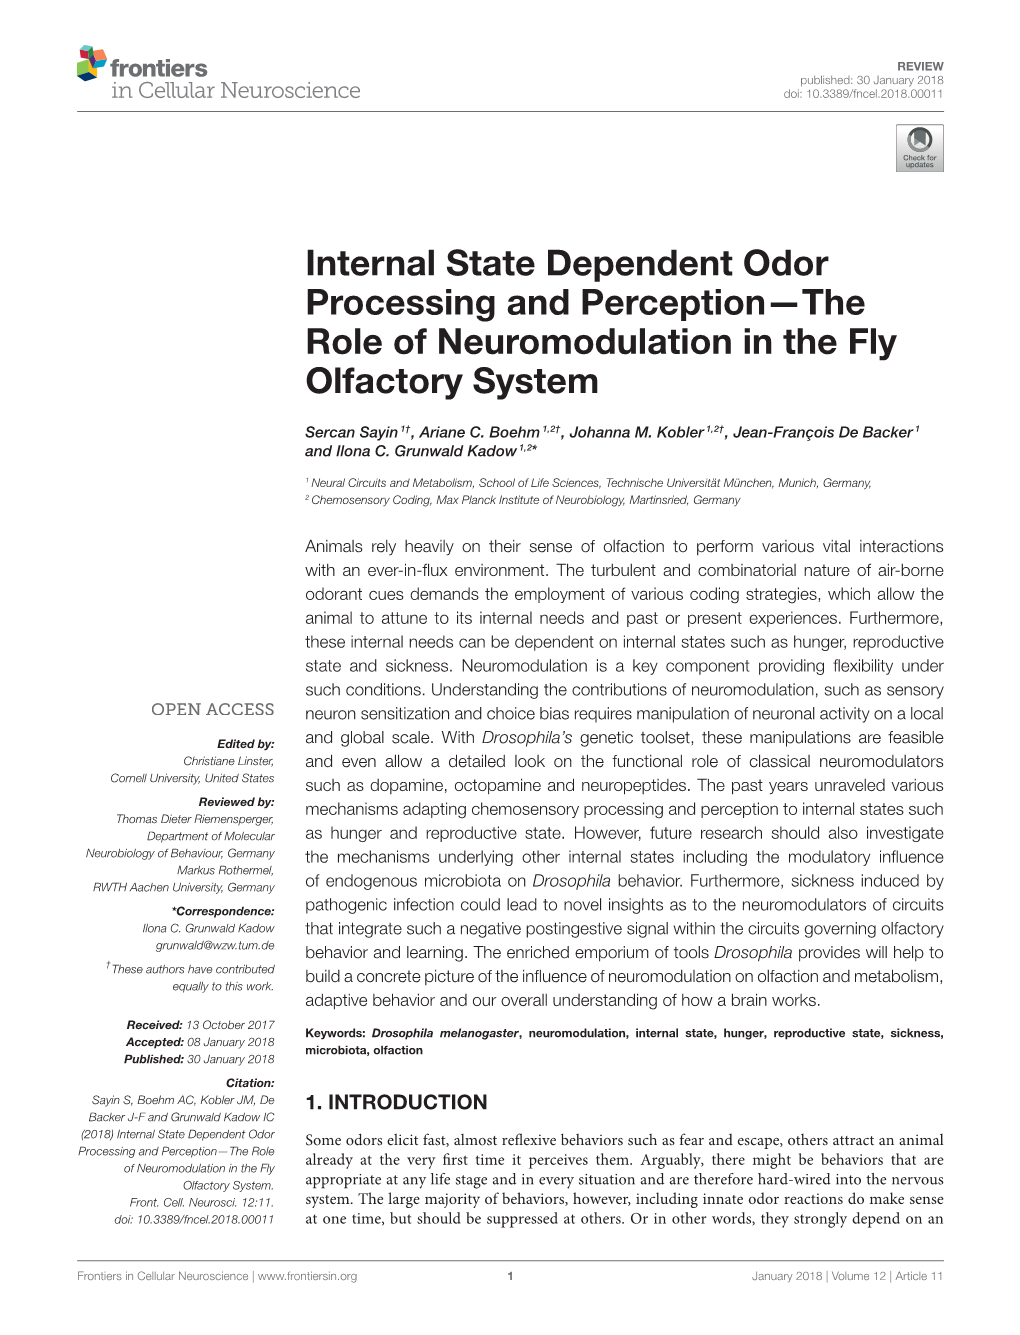 Internal State Dependent Odor Processing and Perception—The Role of Neuromodulation in the Fly Olfactory System